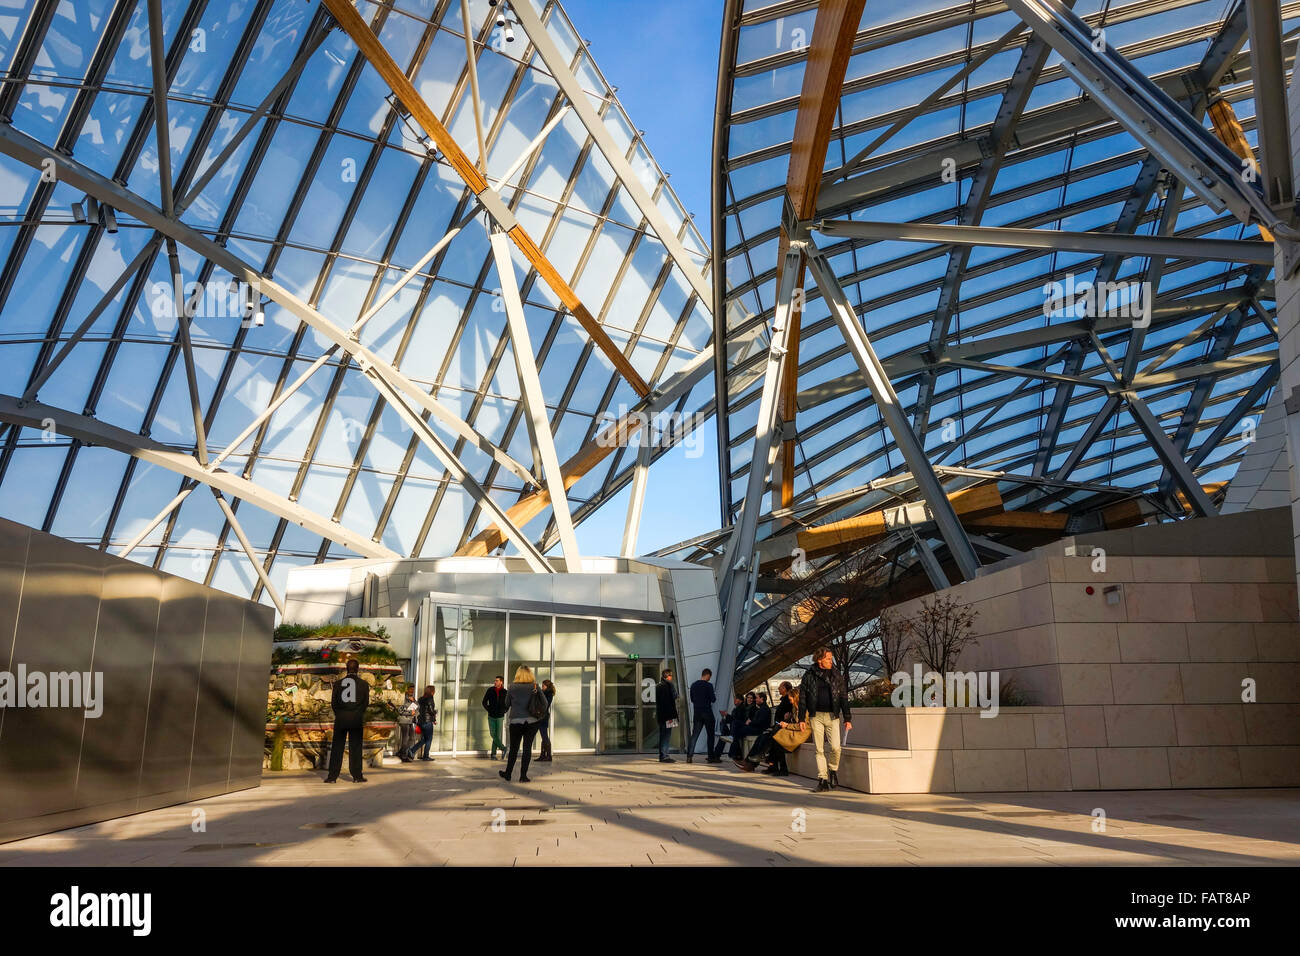 Louis Vuitton Foundation, by architect Frank Gehry, art museum and Stock Photo: 92731822 - Alamy